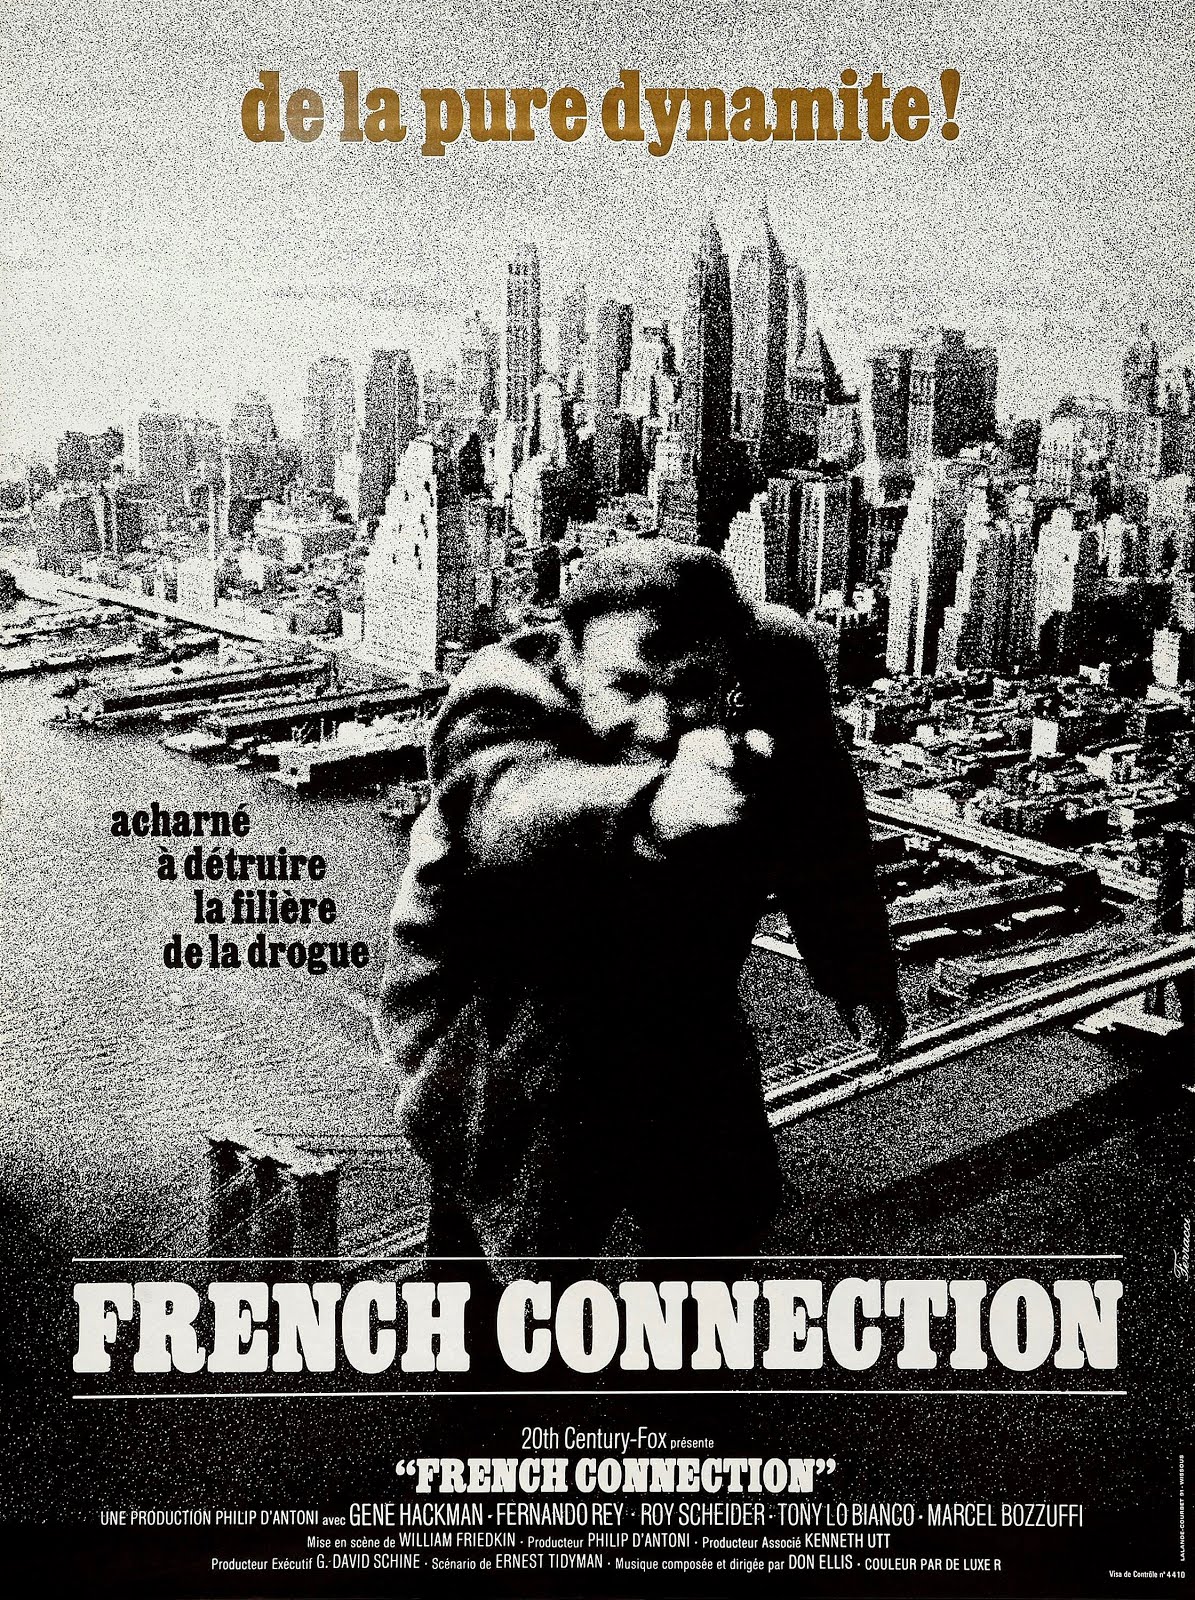 French connection (1971) William Friedkin - The French connection (30.11.1970 / 03.1971)